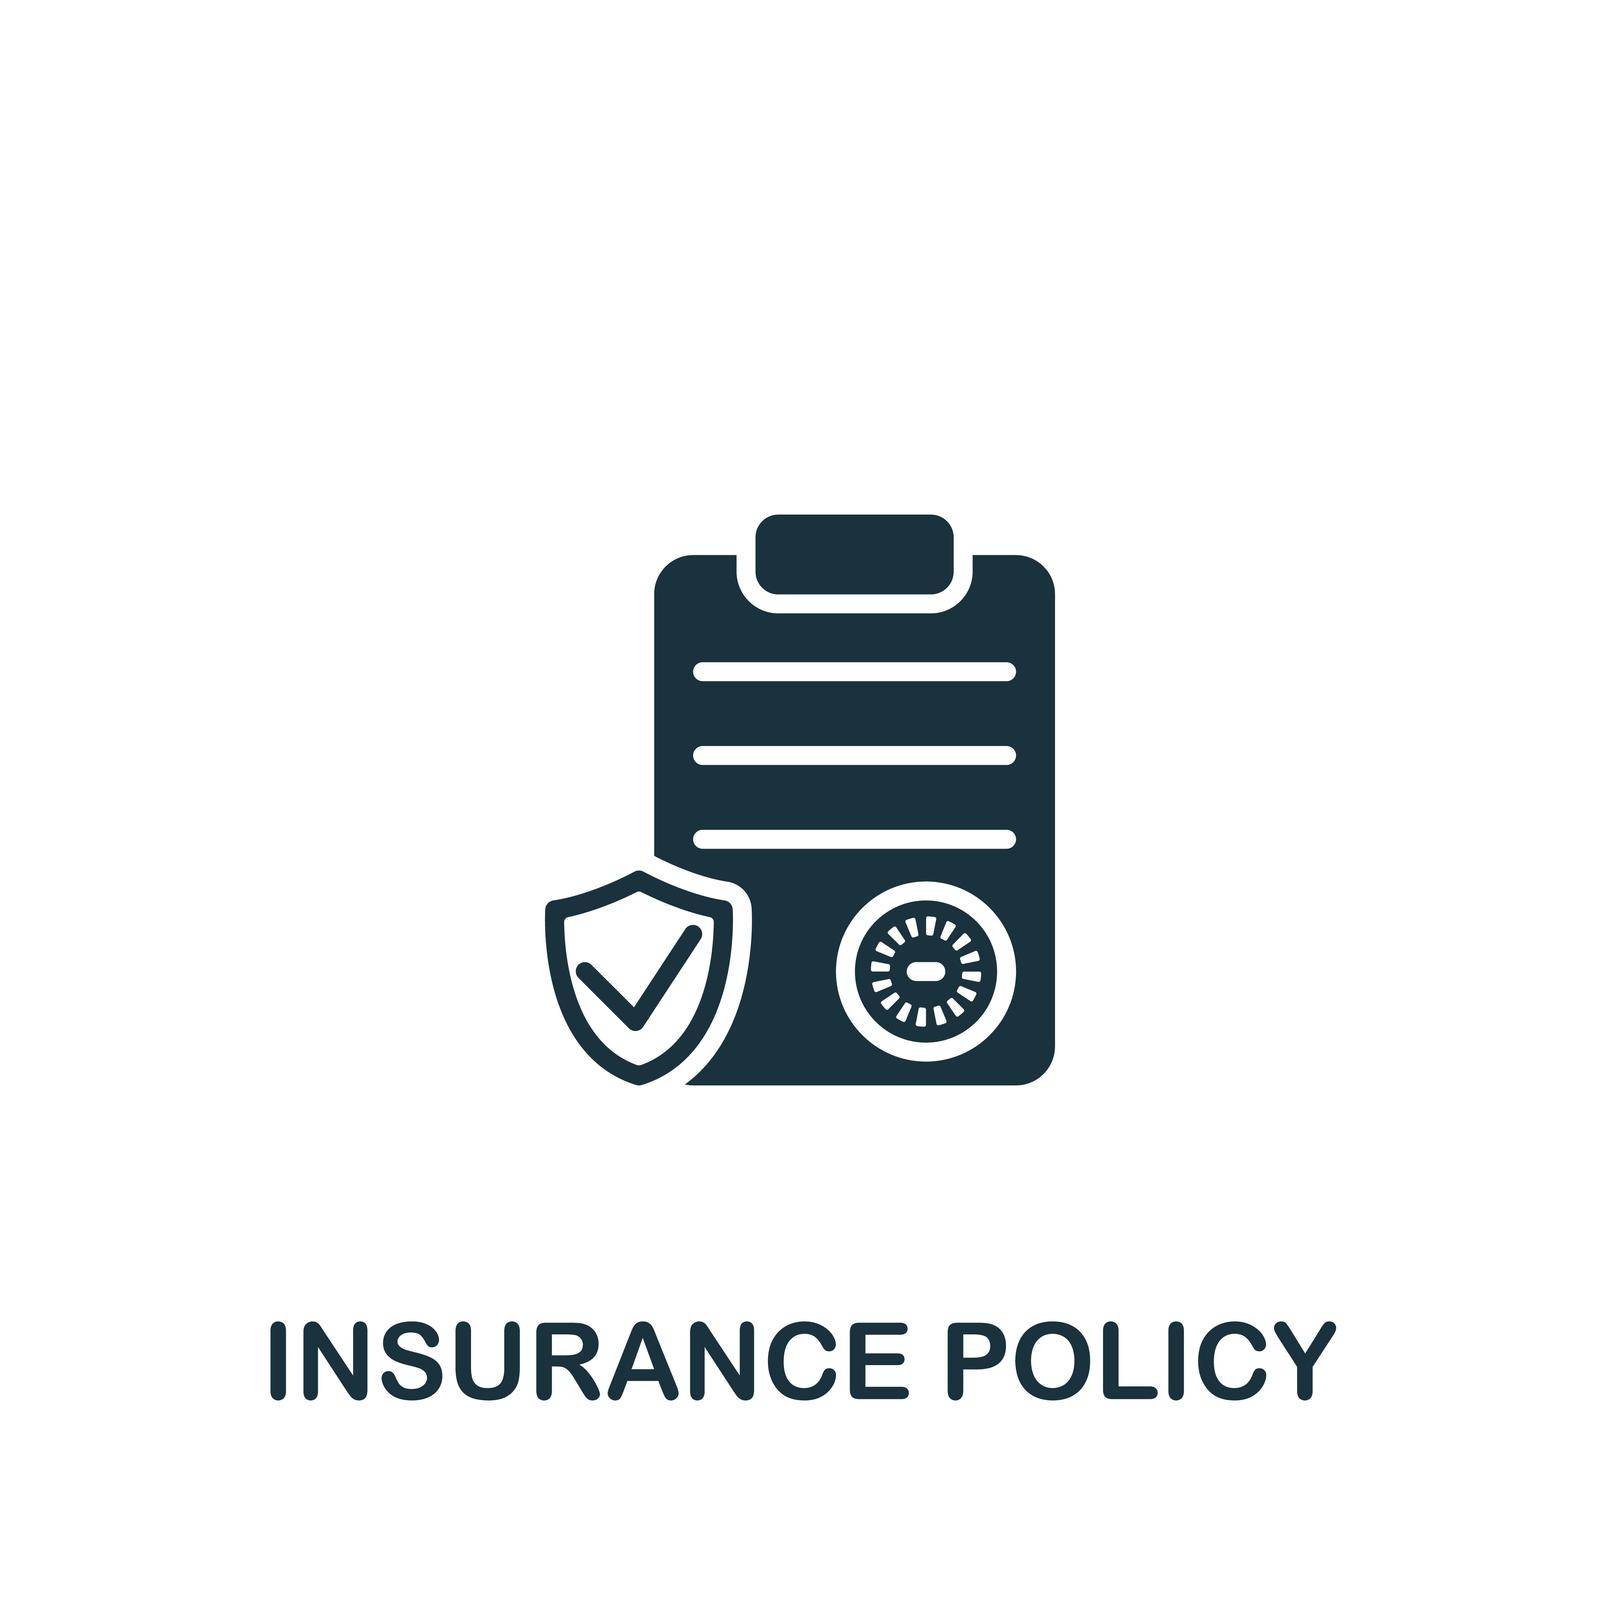 Insurance Policy icon. Monochrome simple Insurance icon for templates, web design and infographics by simakovavector